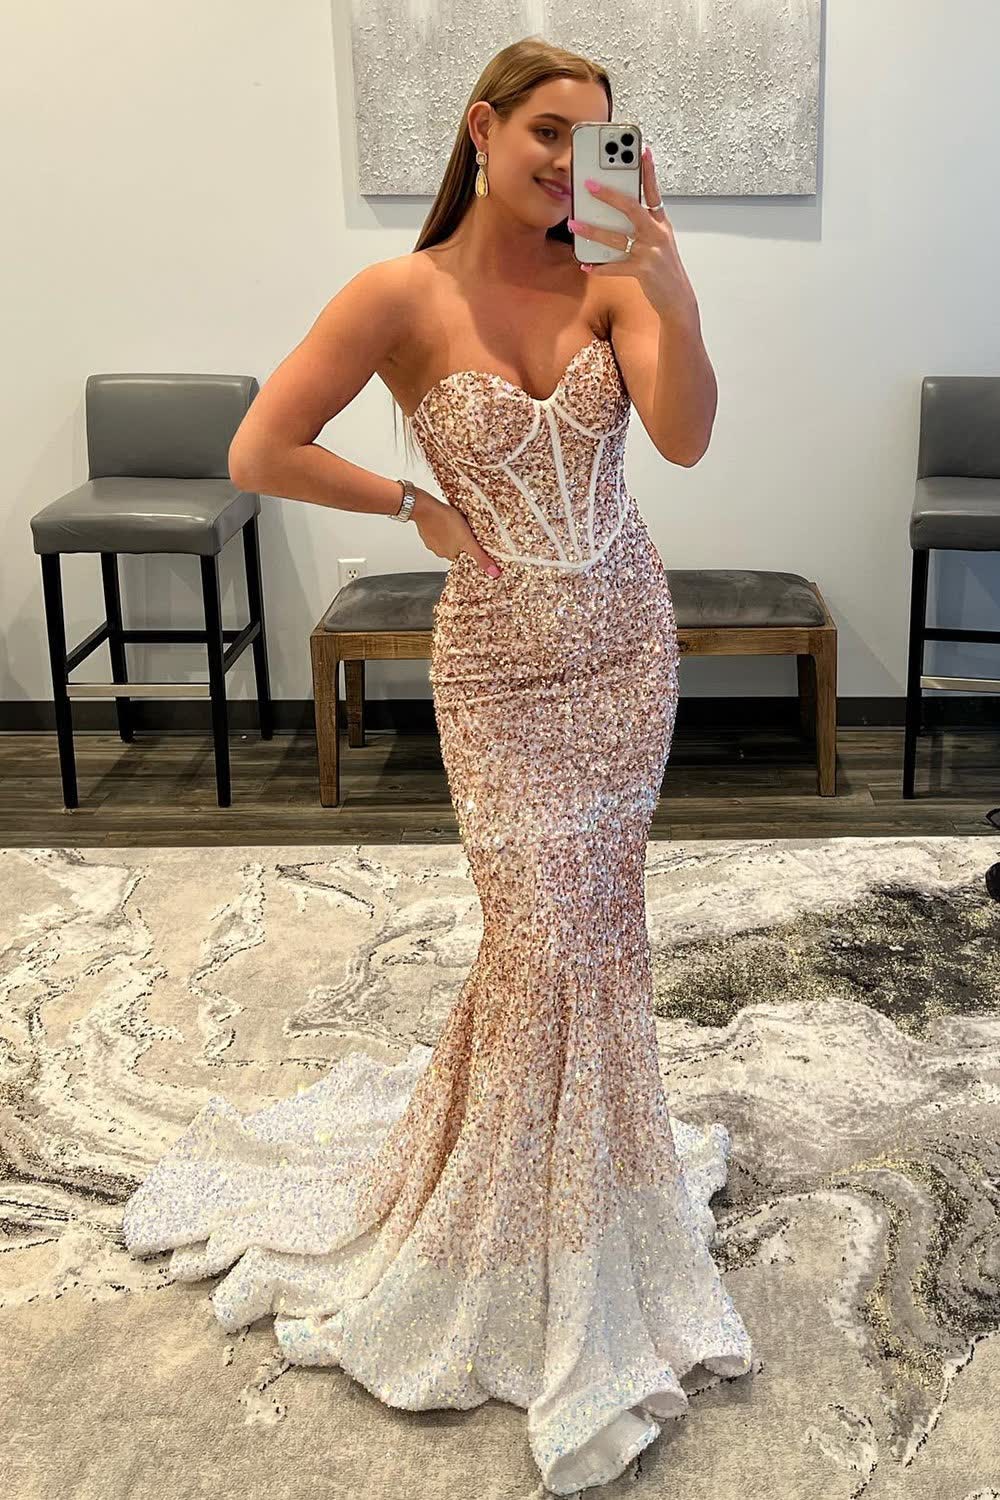 Rose Gold Sparkly Sequins Mermaid Long Corset Prom Dress outfits, Rose Gold Sparkly Sequins Mermaid Long Prom Dress